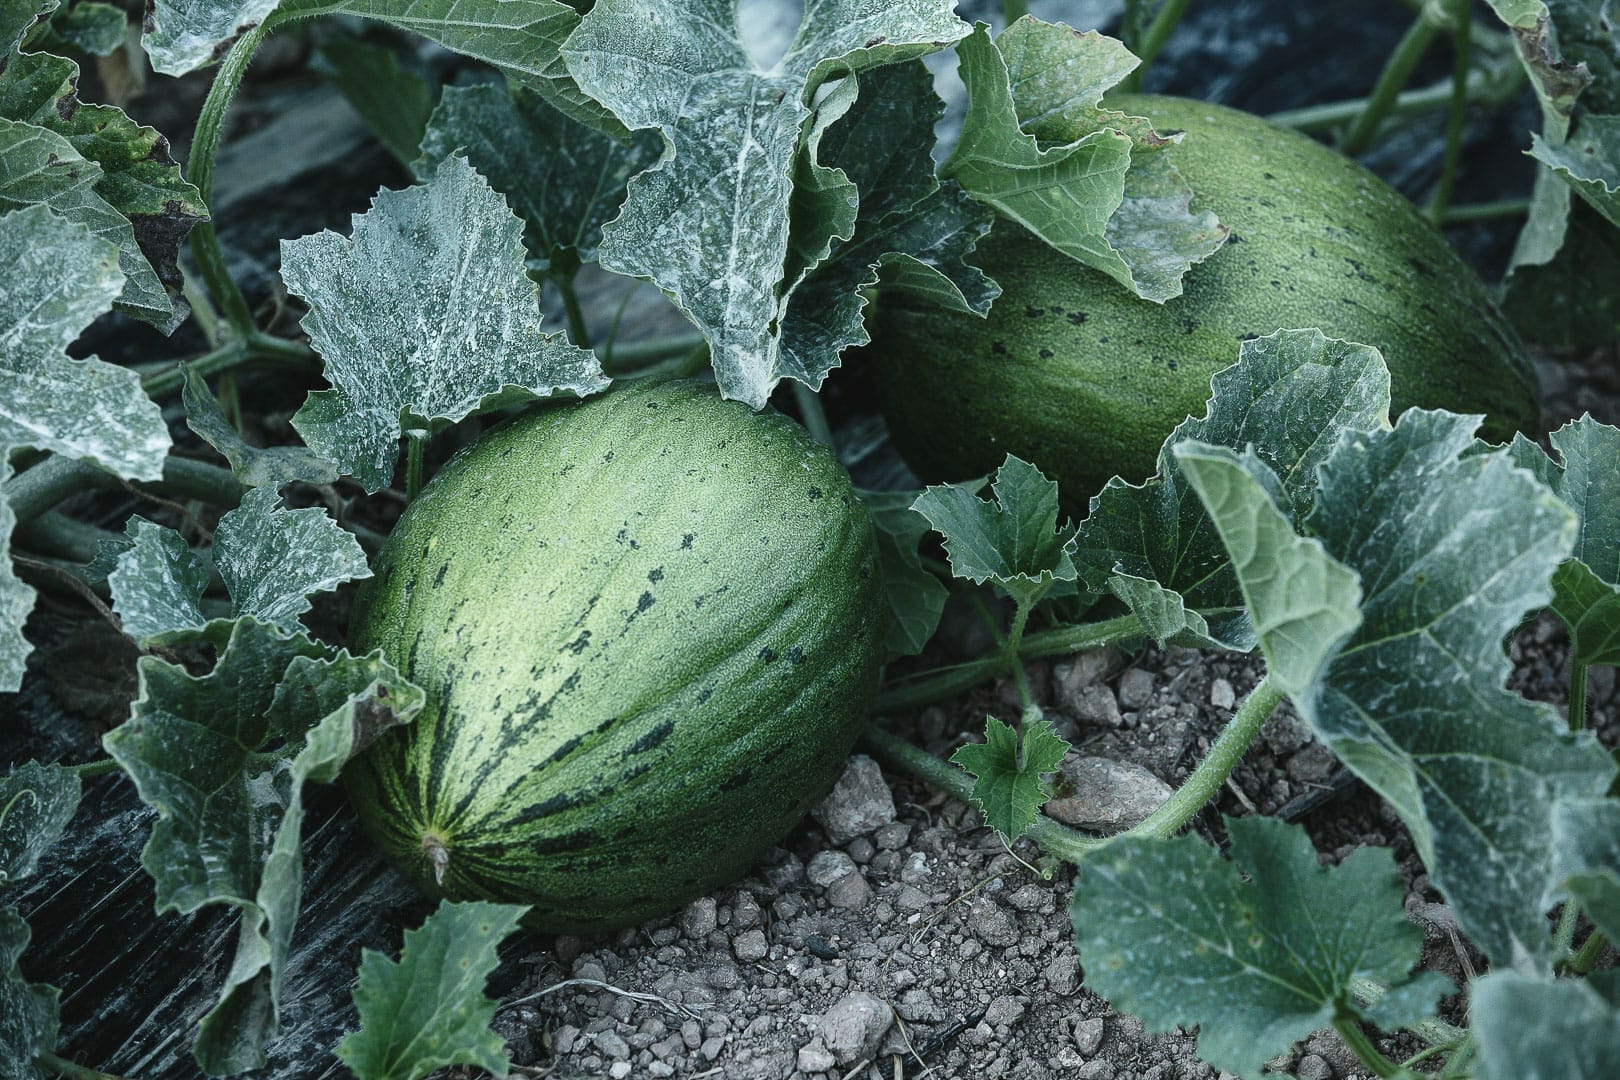 Image of two pieces of melon grown in a garden in Ibiza